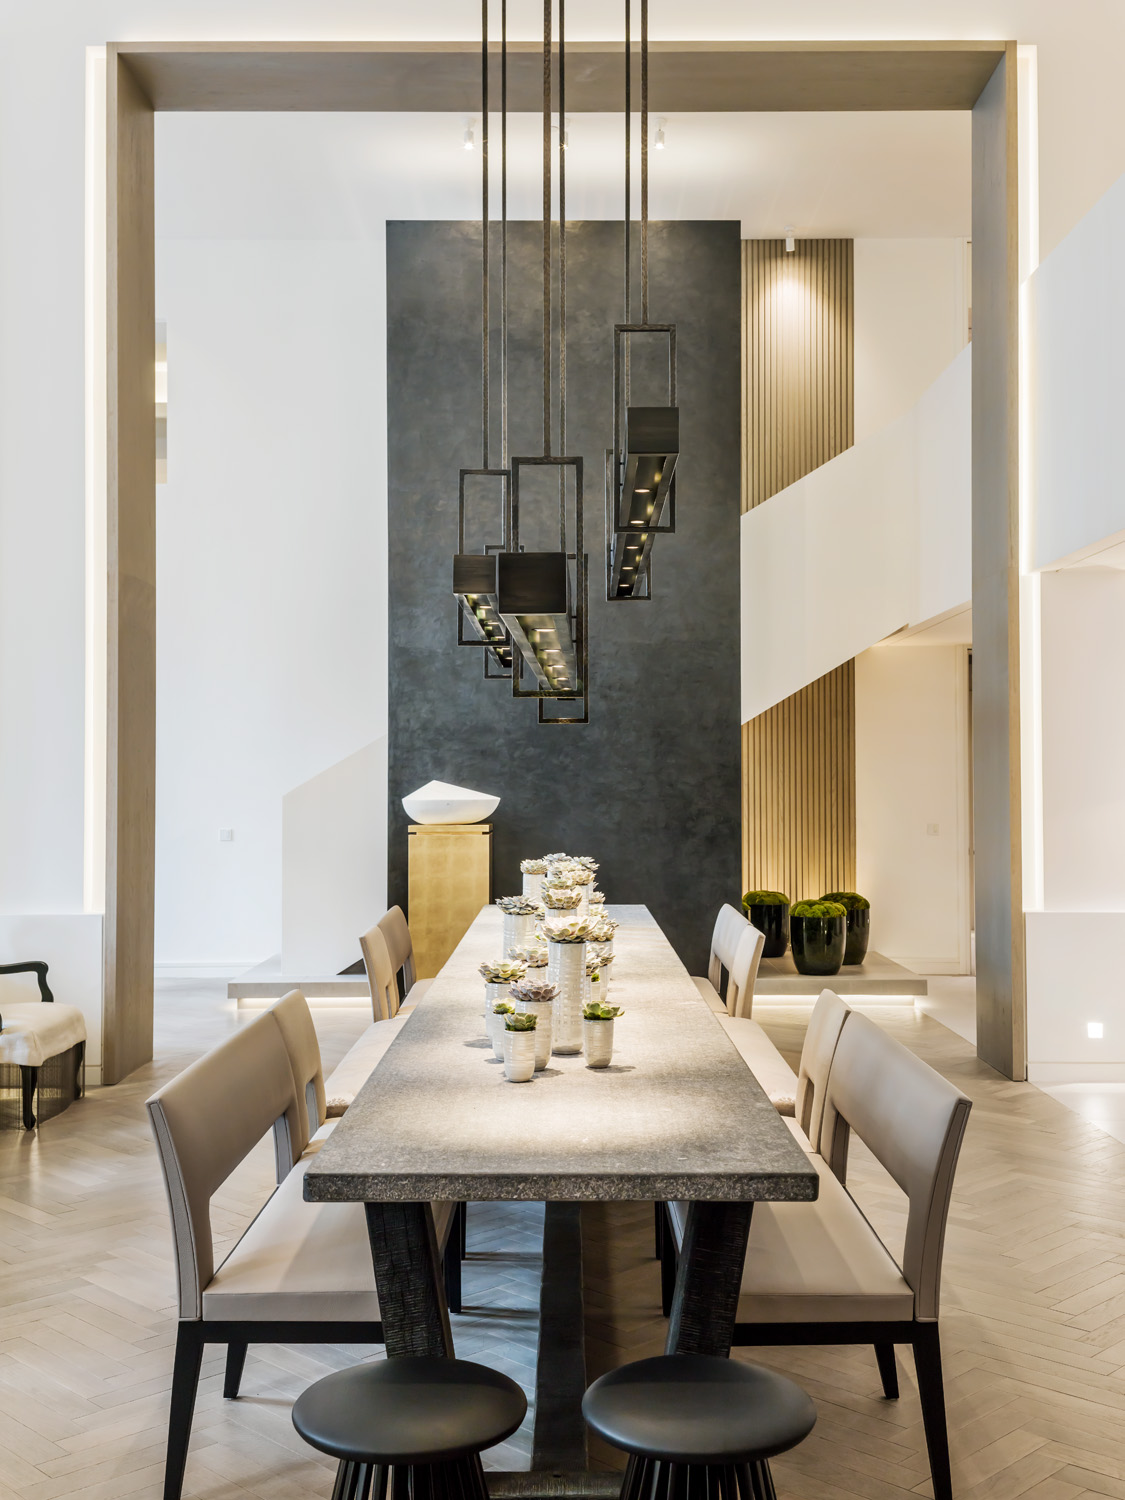 Dining table by Kelly Hoppen - luxury and minimalist interior design studio in London